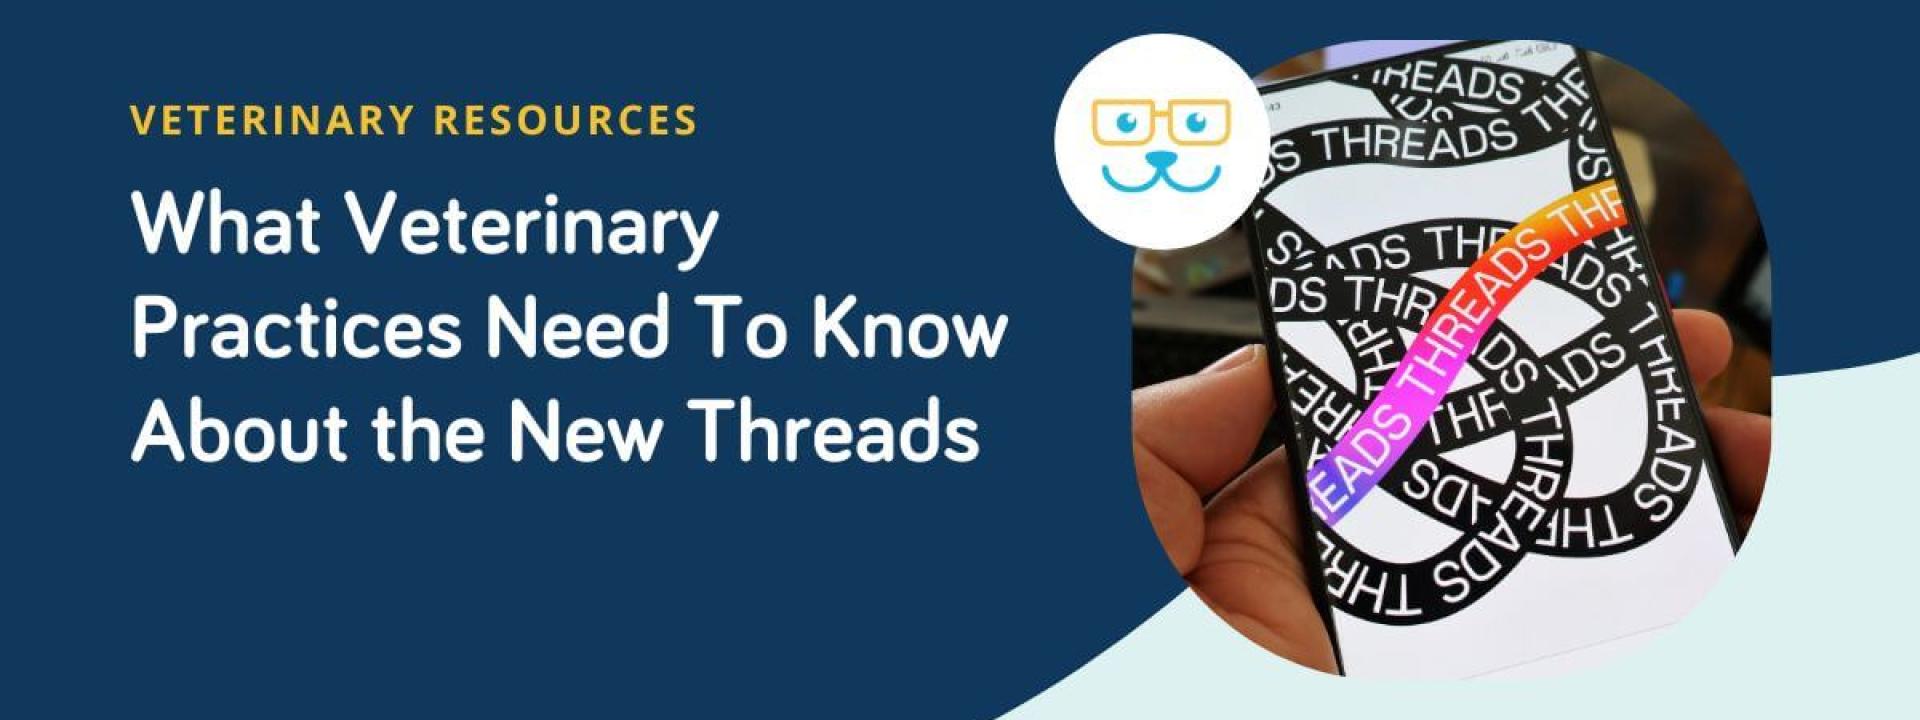 What Veterinary Practices Need To Know About the New Threads